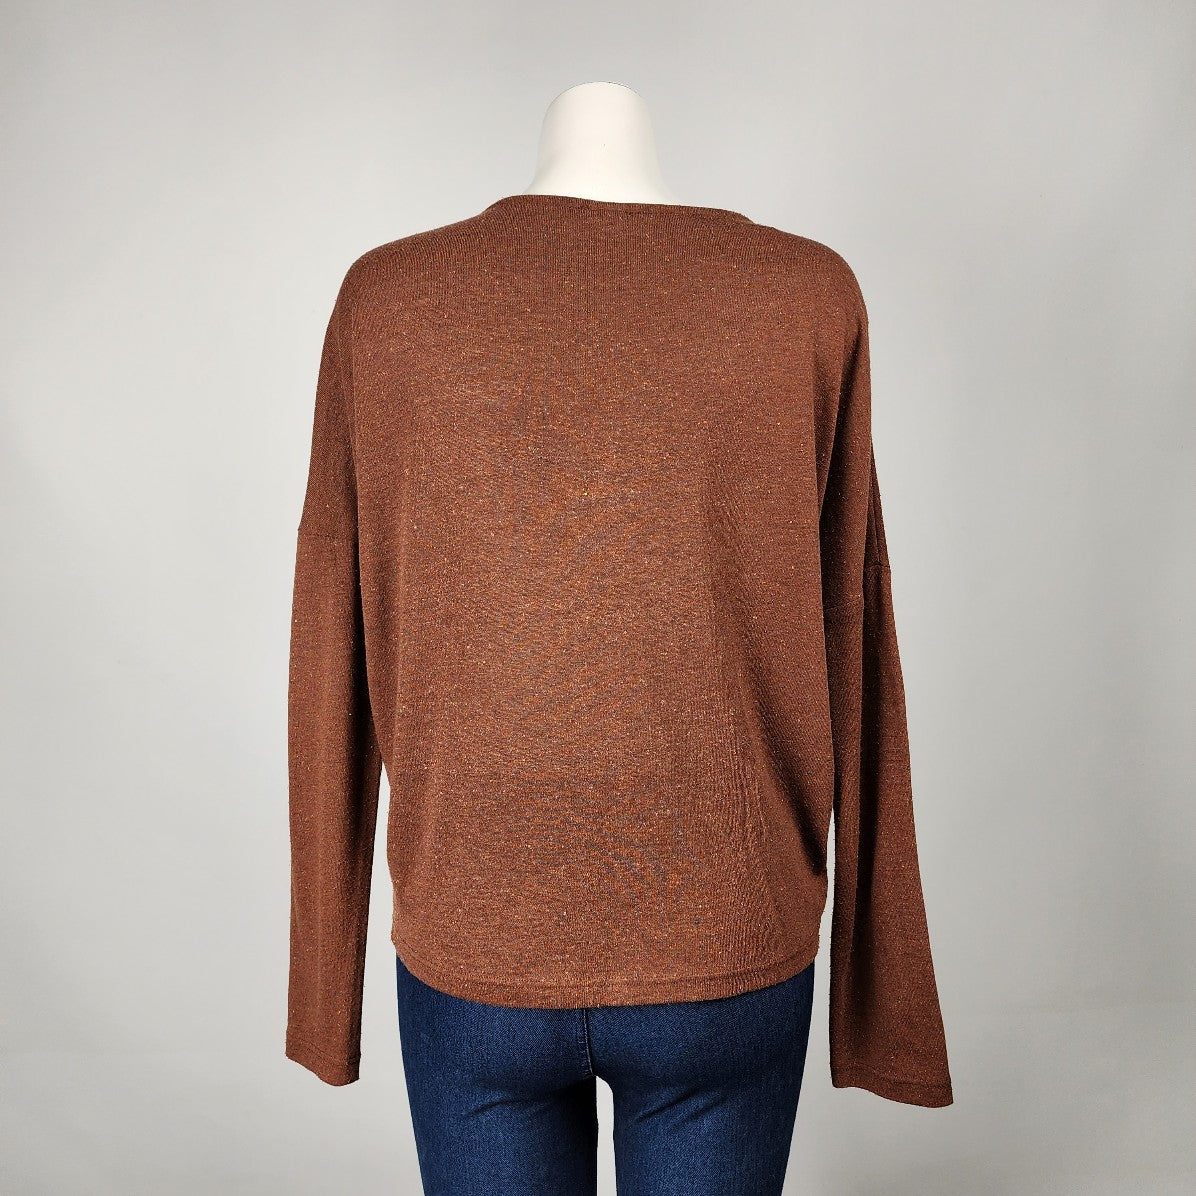 Eve Gravel Brown Long Sleeve Top Size M